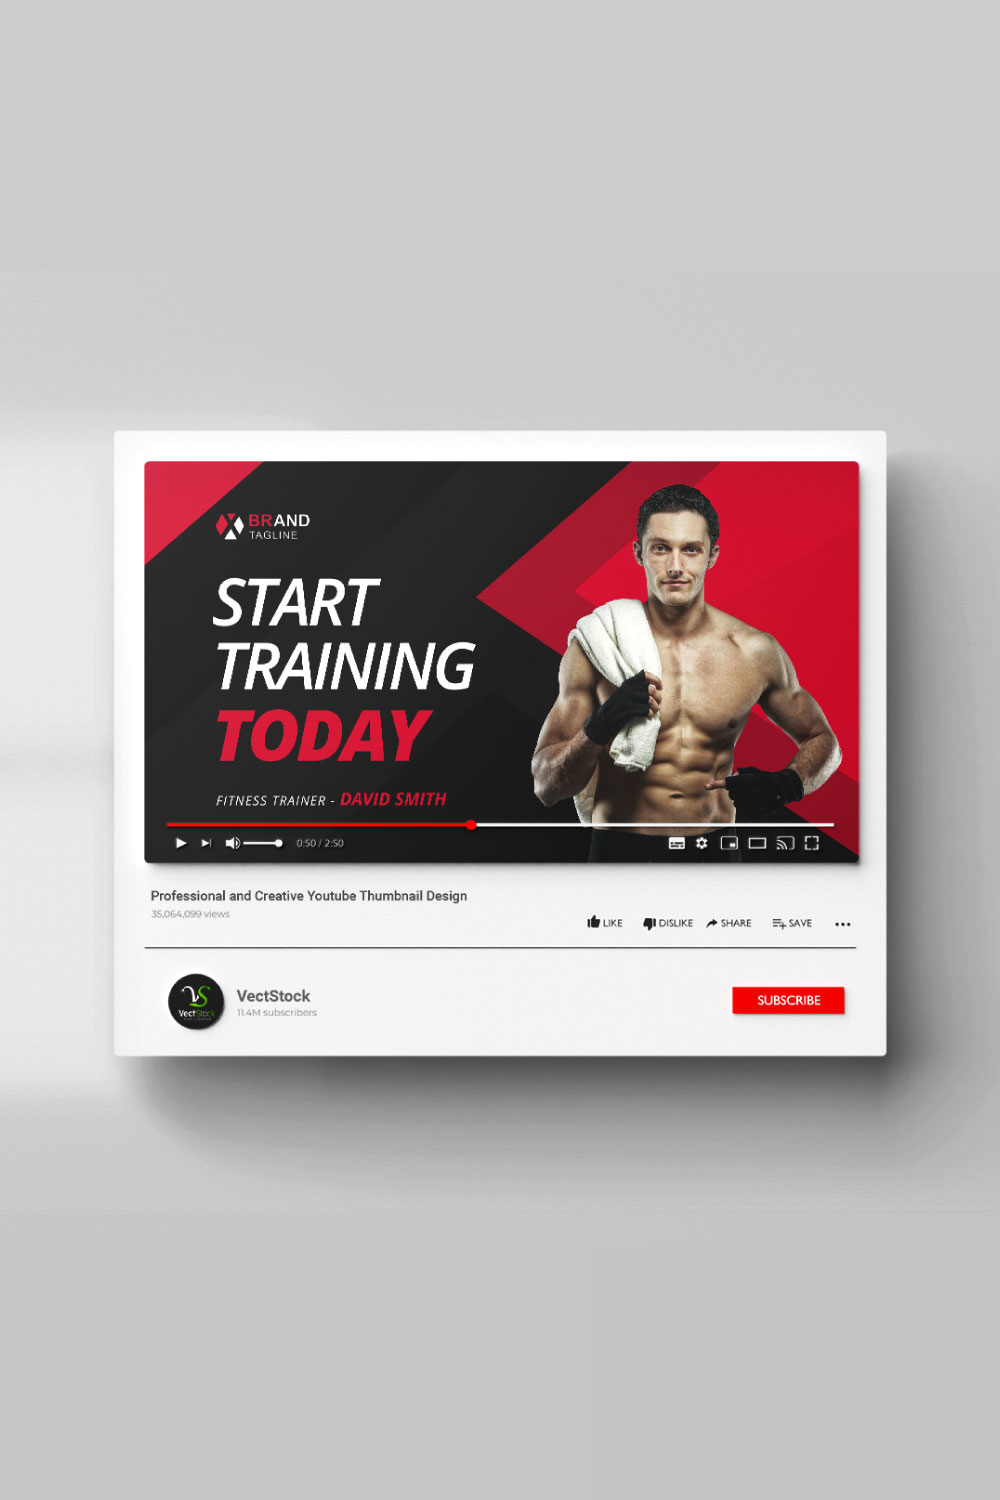 Gym fitness training Youtube thumbnail design pinterest preview image.